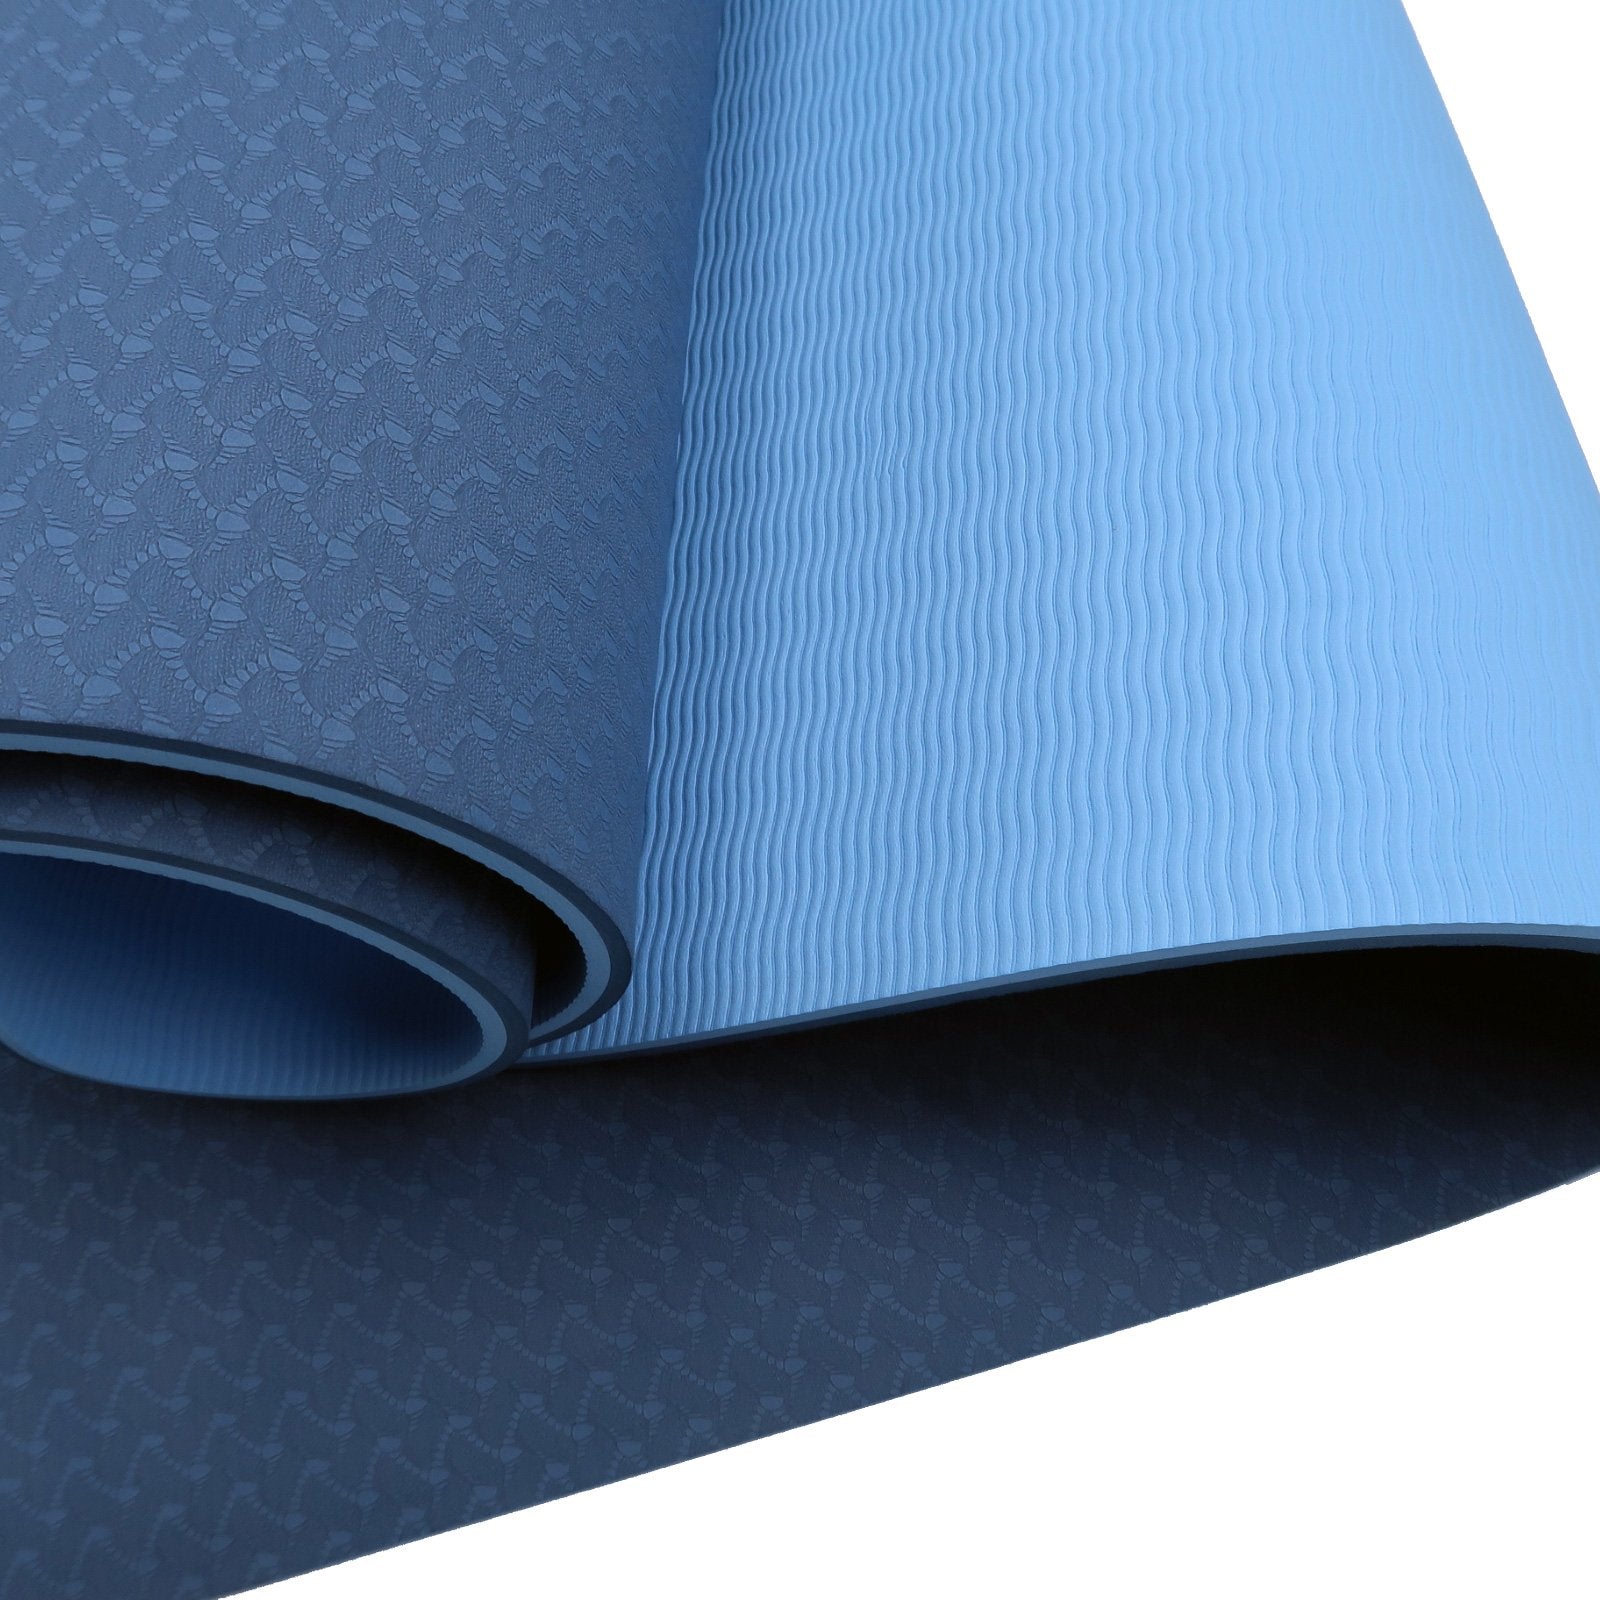 Eco-friendly Dual Layer 8mm Yoga Mat | Dark Blue | Non-slip Surface And Carry Strap For Ultimate Comfort And Portability